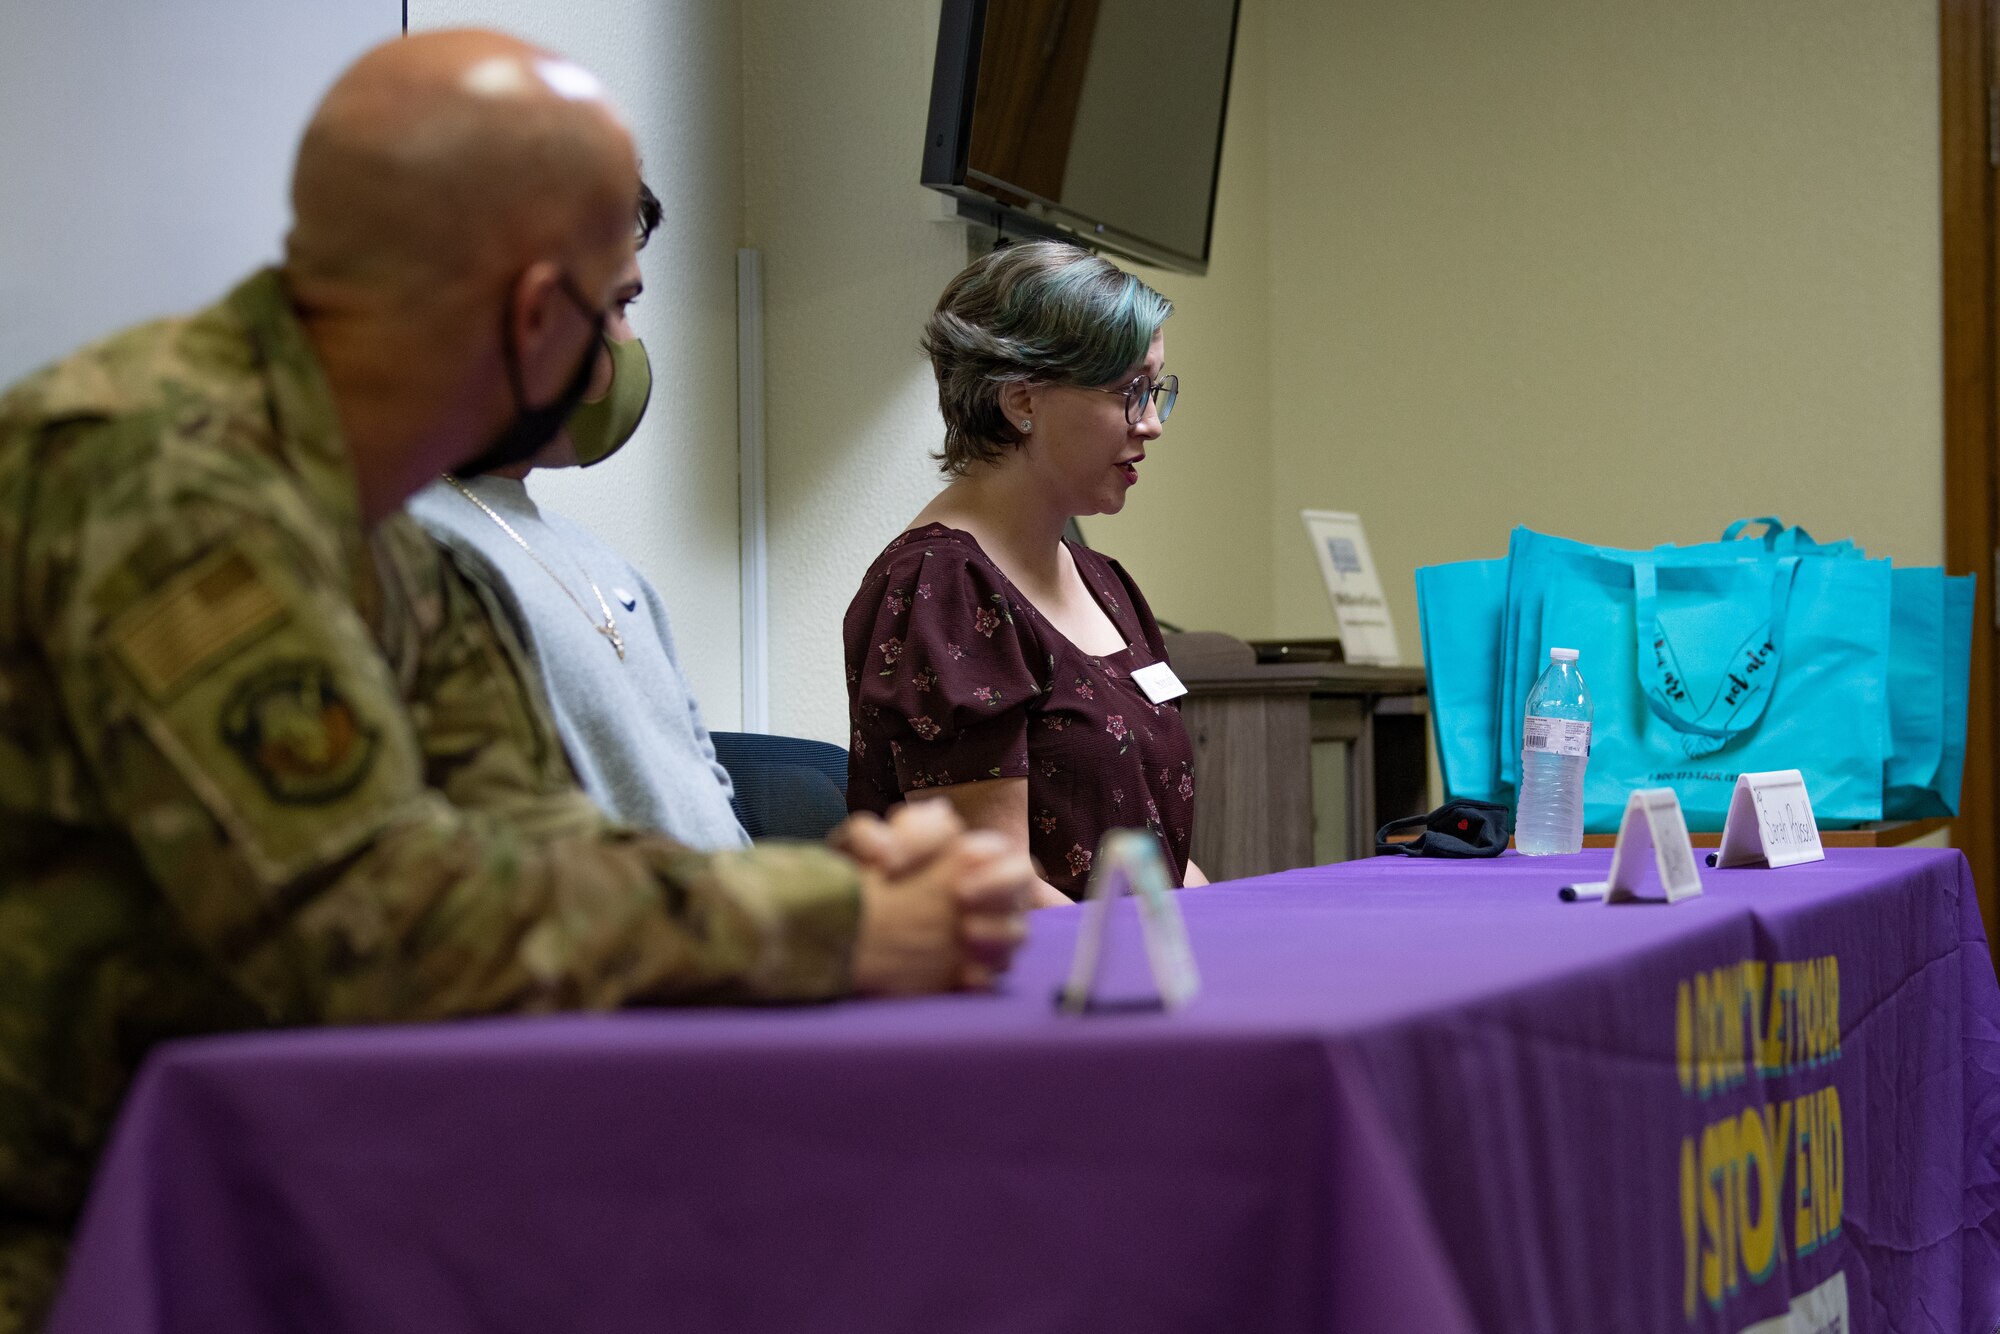 Participants share their experiences overcoming adversity during a Storytellers event at Kadena Air Base, Japan, Sept. 9, 2021.